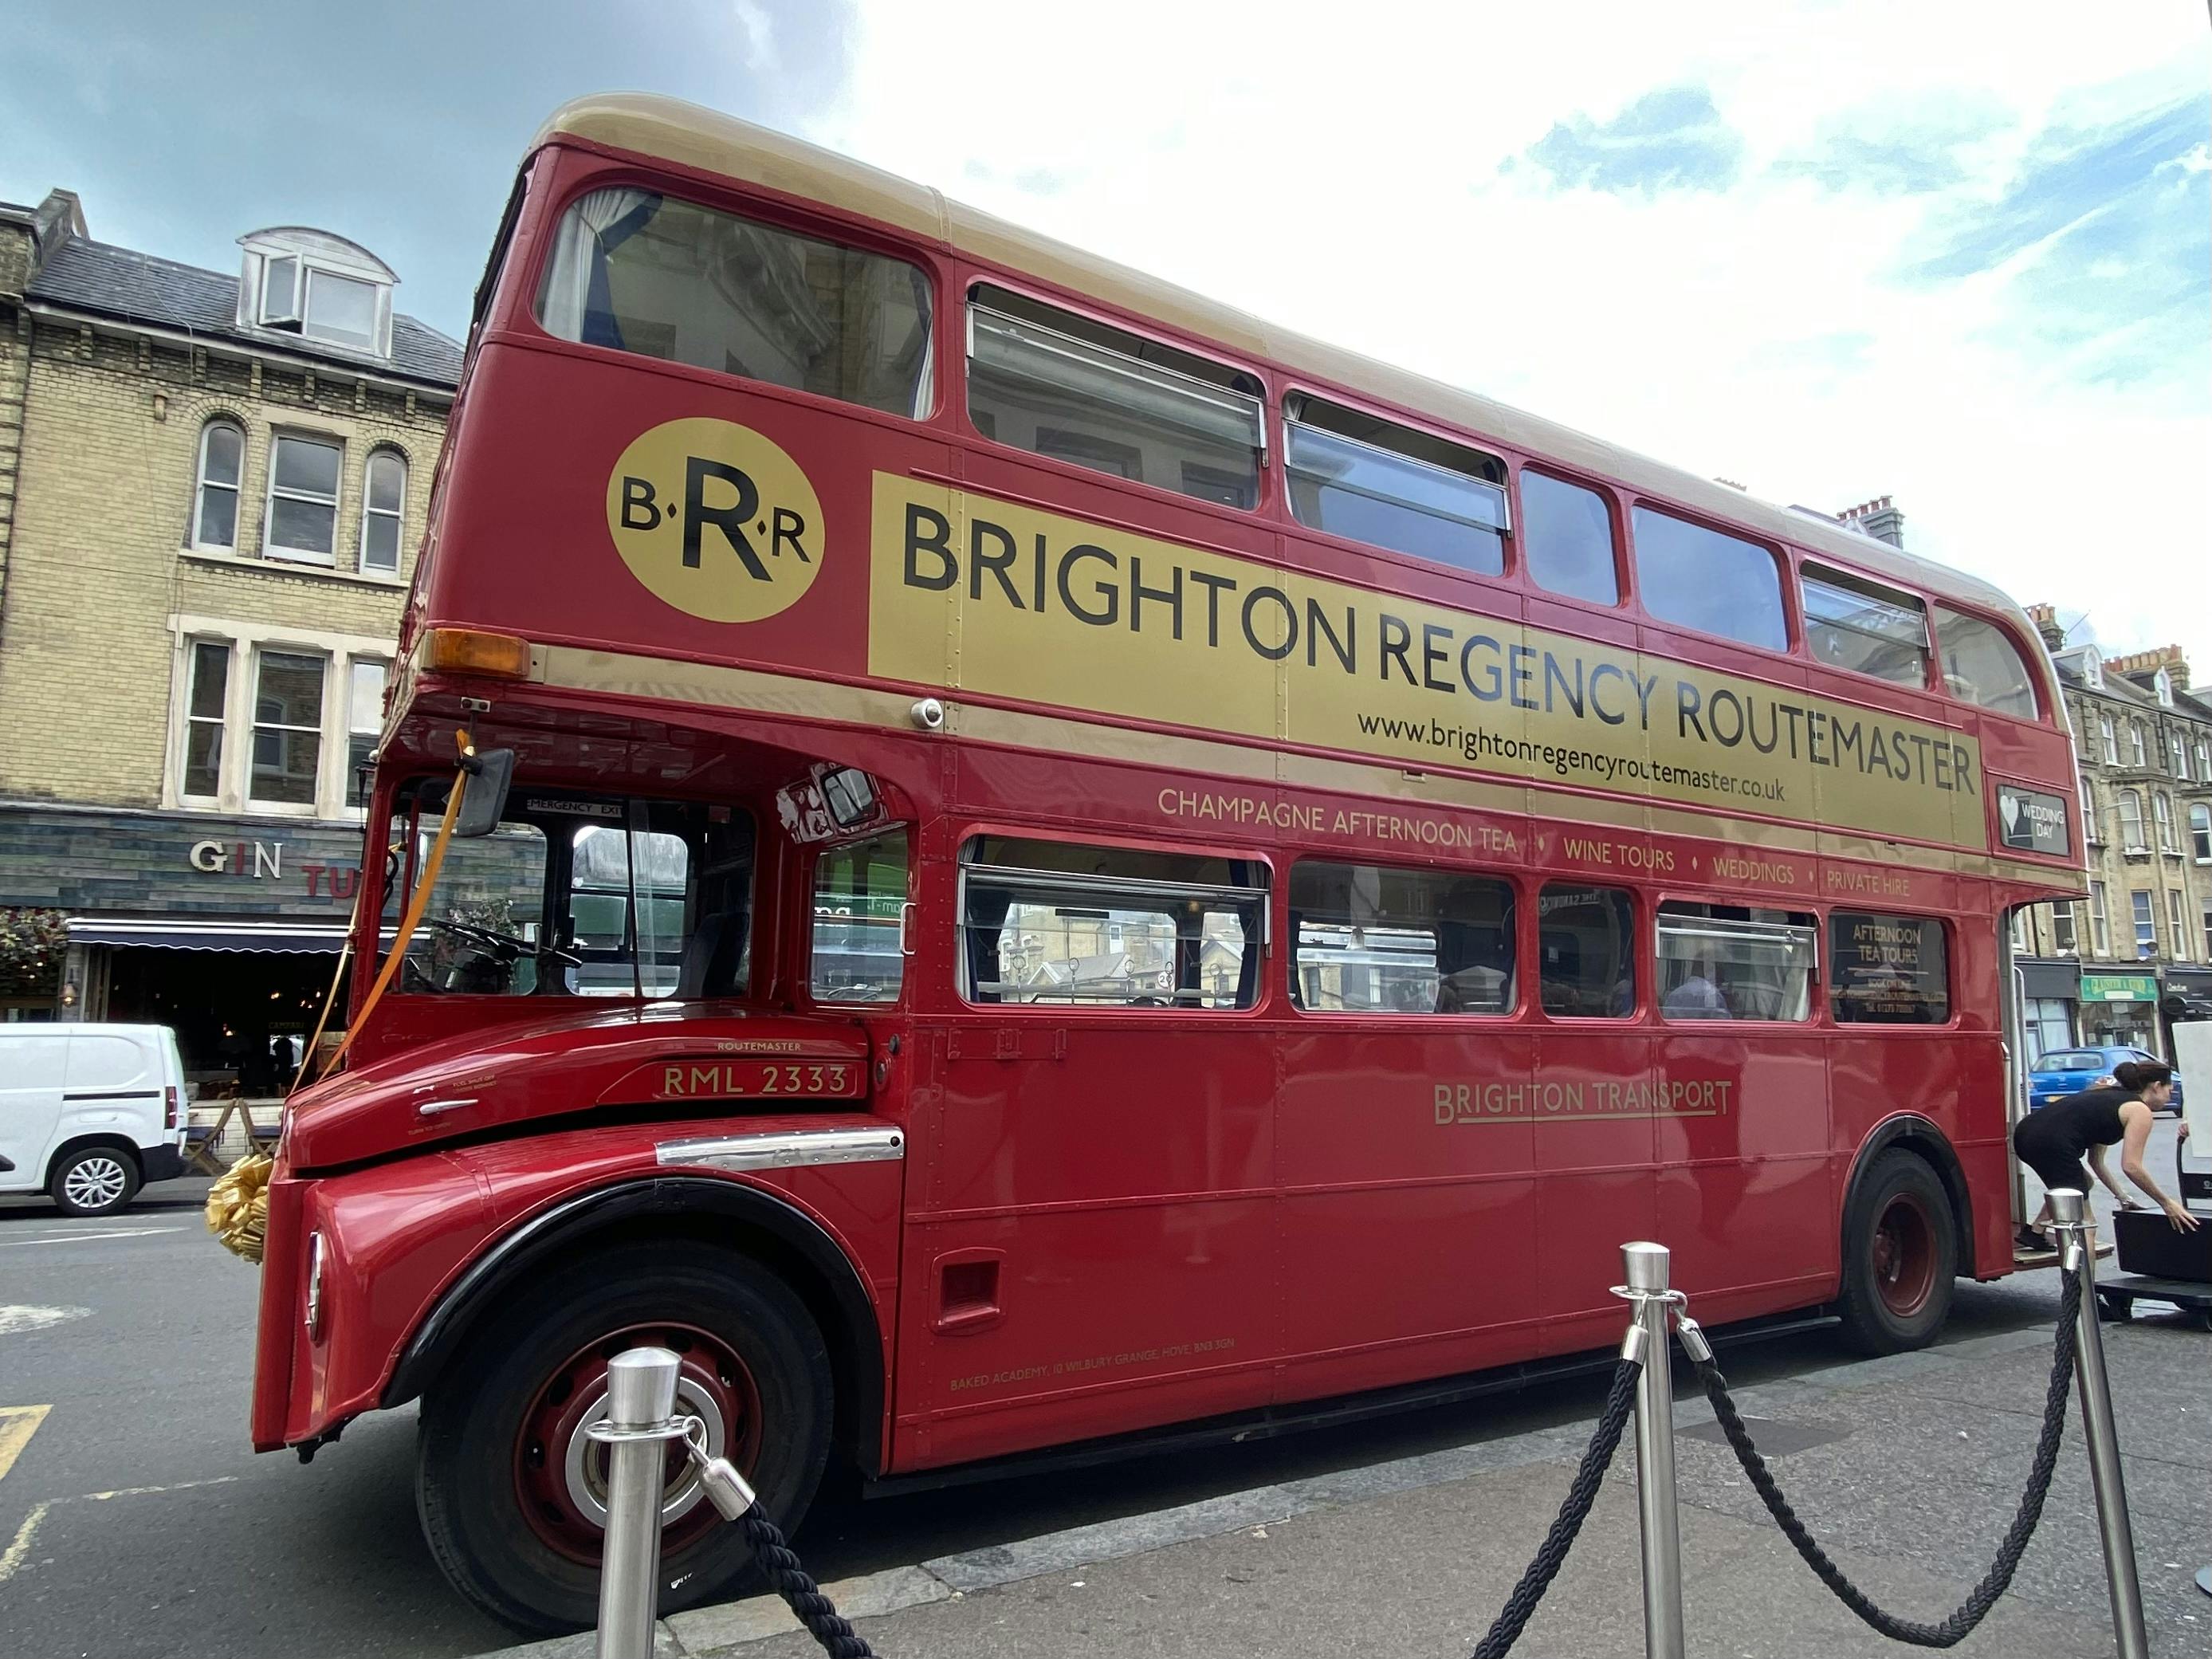 Raise a glass to this specially adapted Routemaster